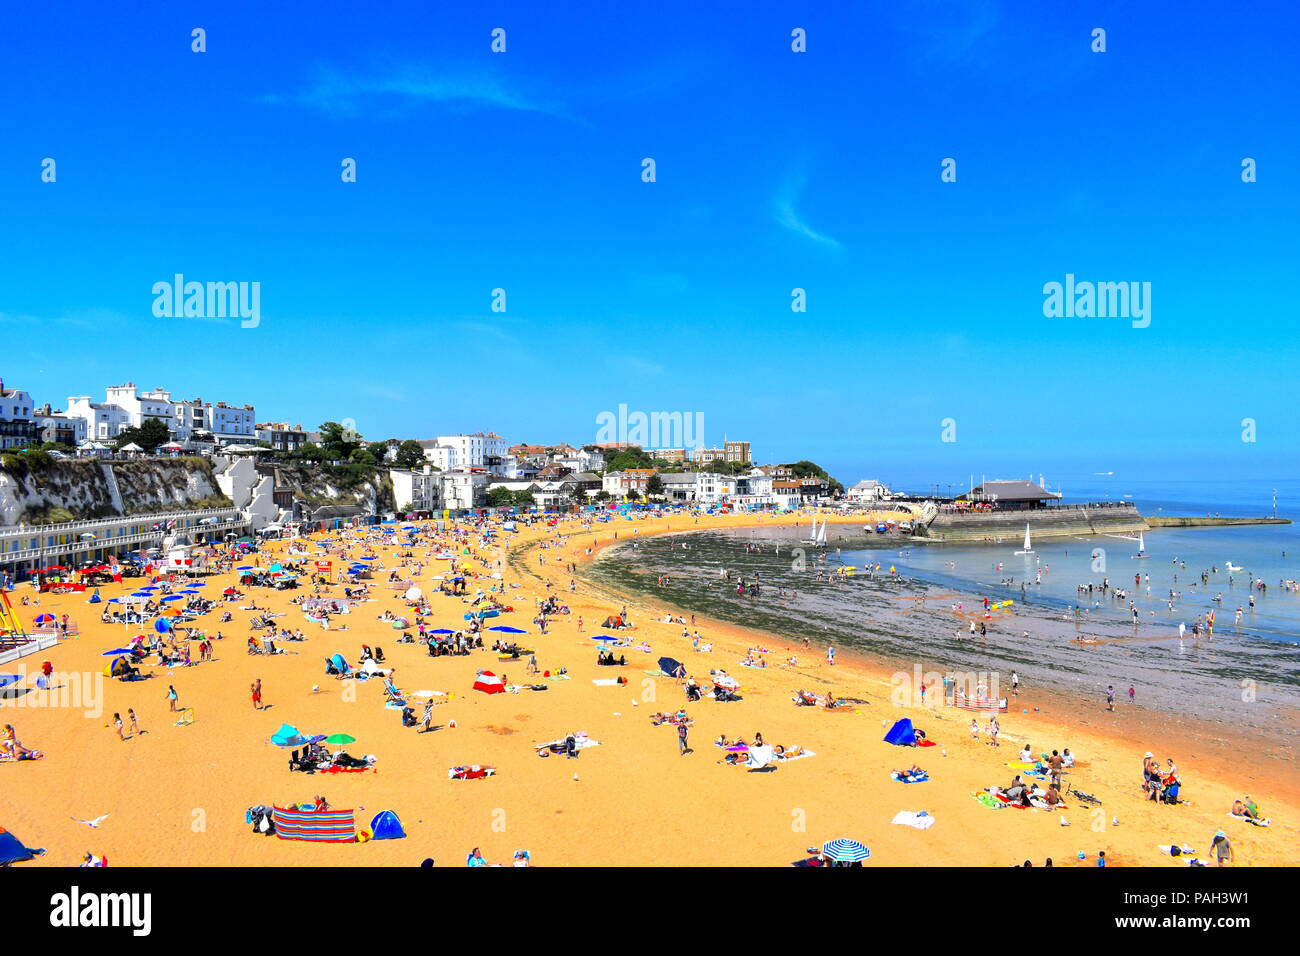 People on the beach in Broadstairs, Kent as the hot weather continues across the UK, July, 2018 Stock Photo